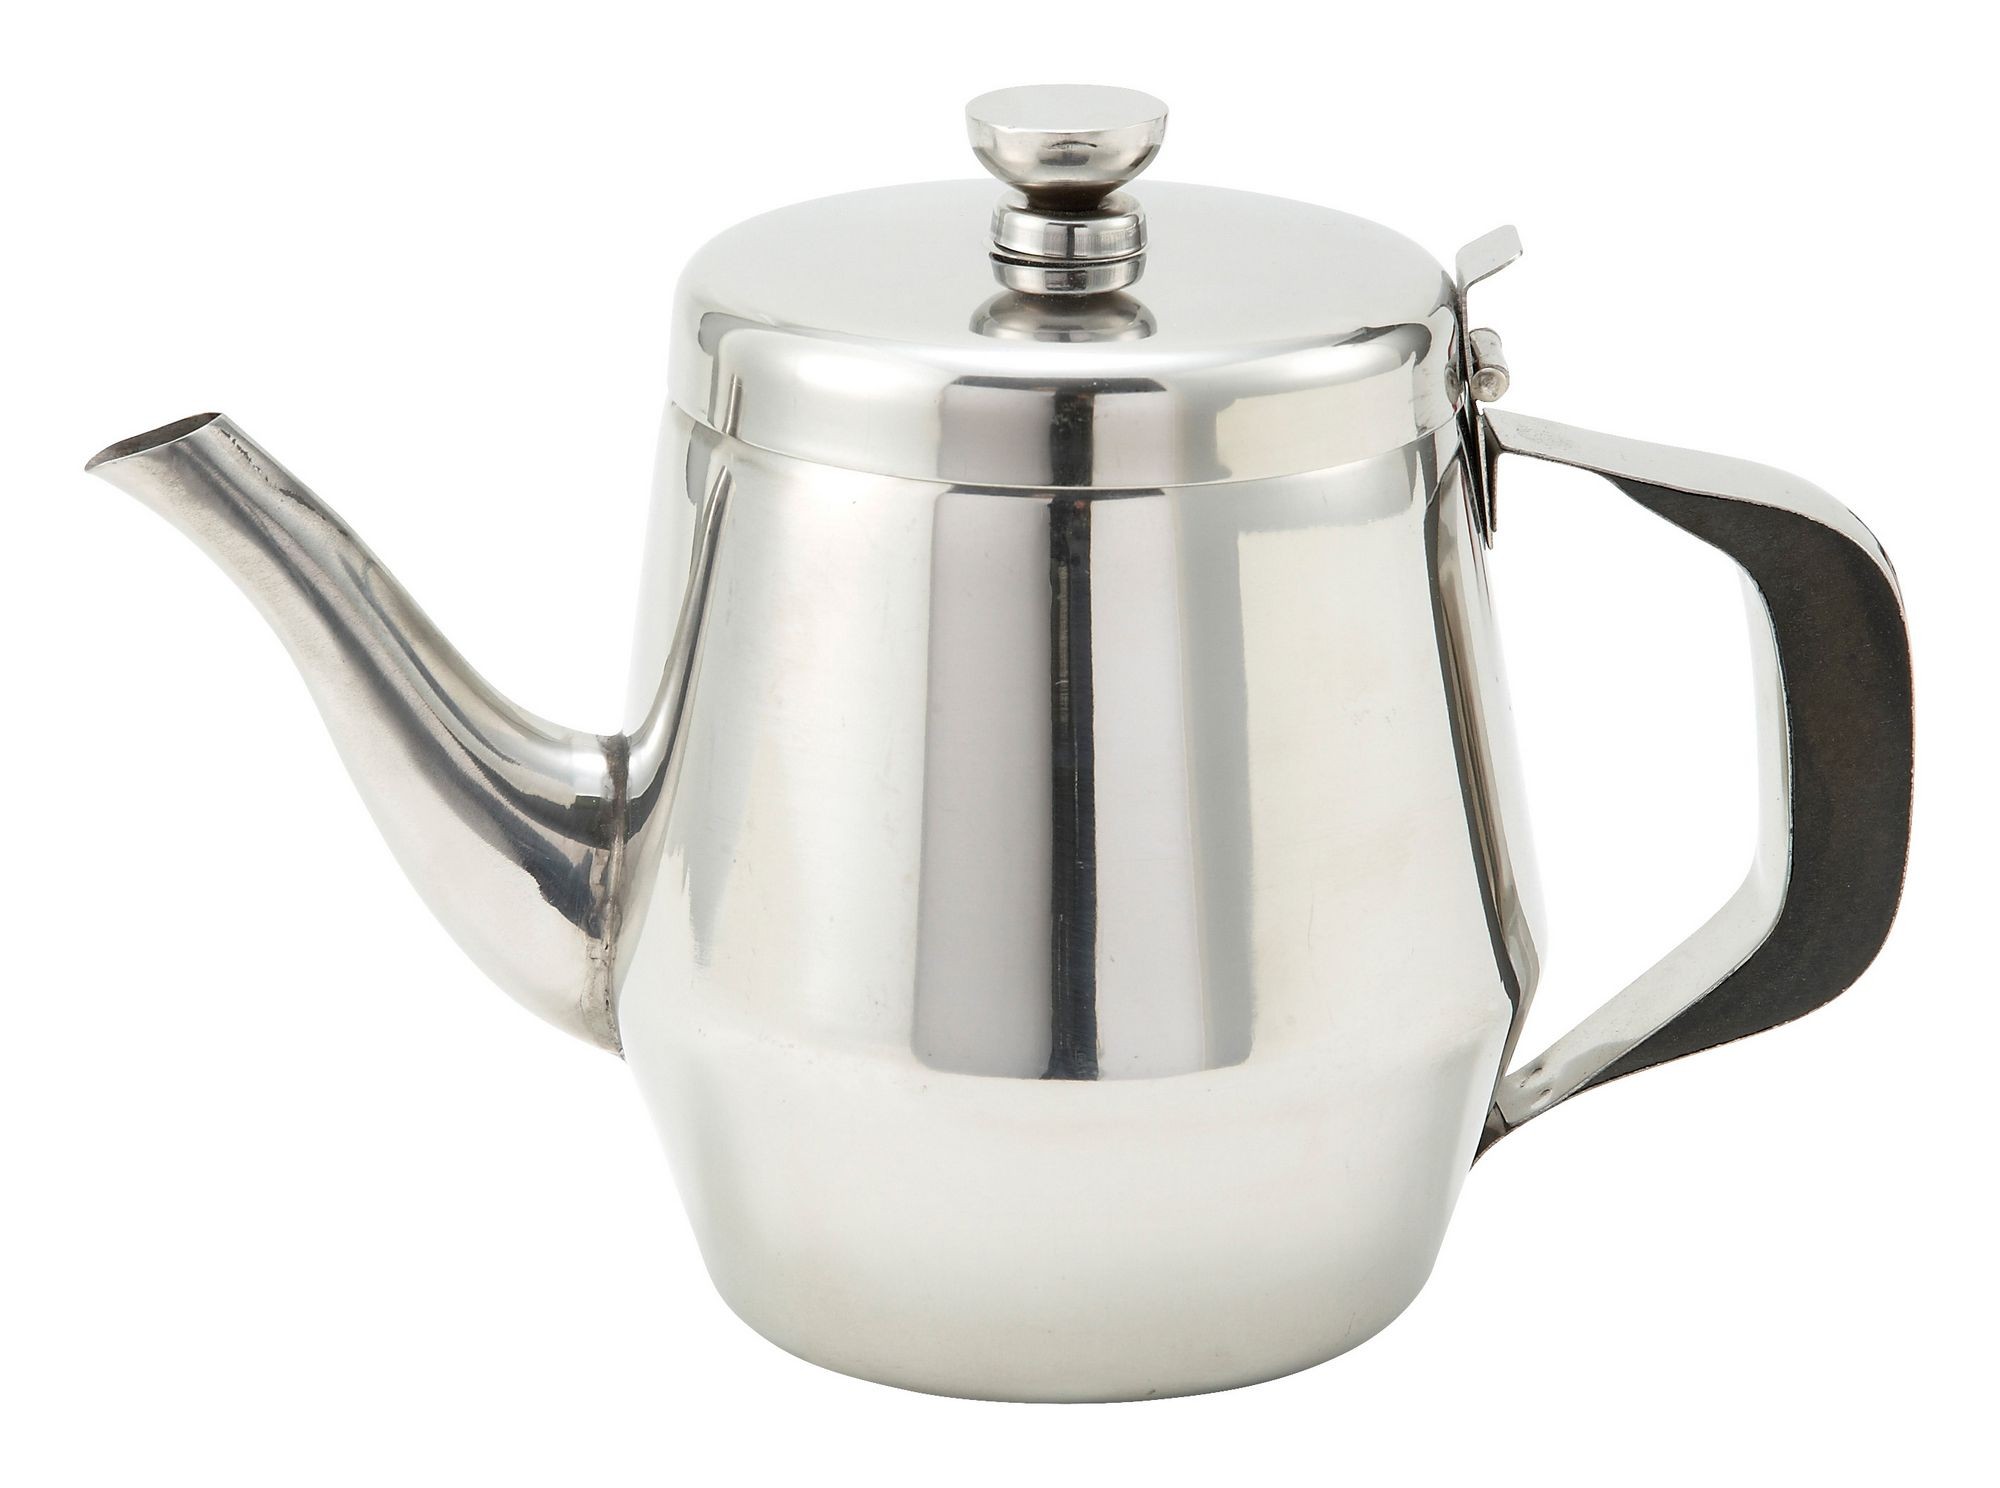 Stainless Steel 32 Oz. Gooseneck Teapot With Handle - LionsDeal